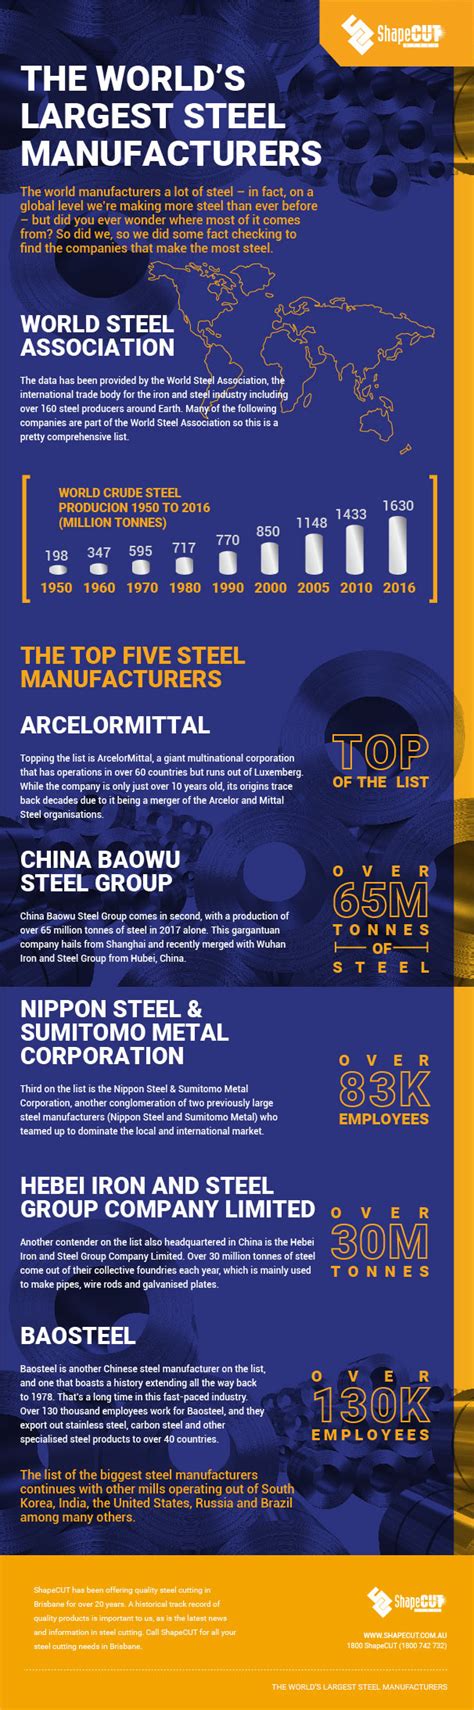 The Worlds Largest Steel Manufacturers